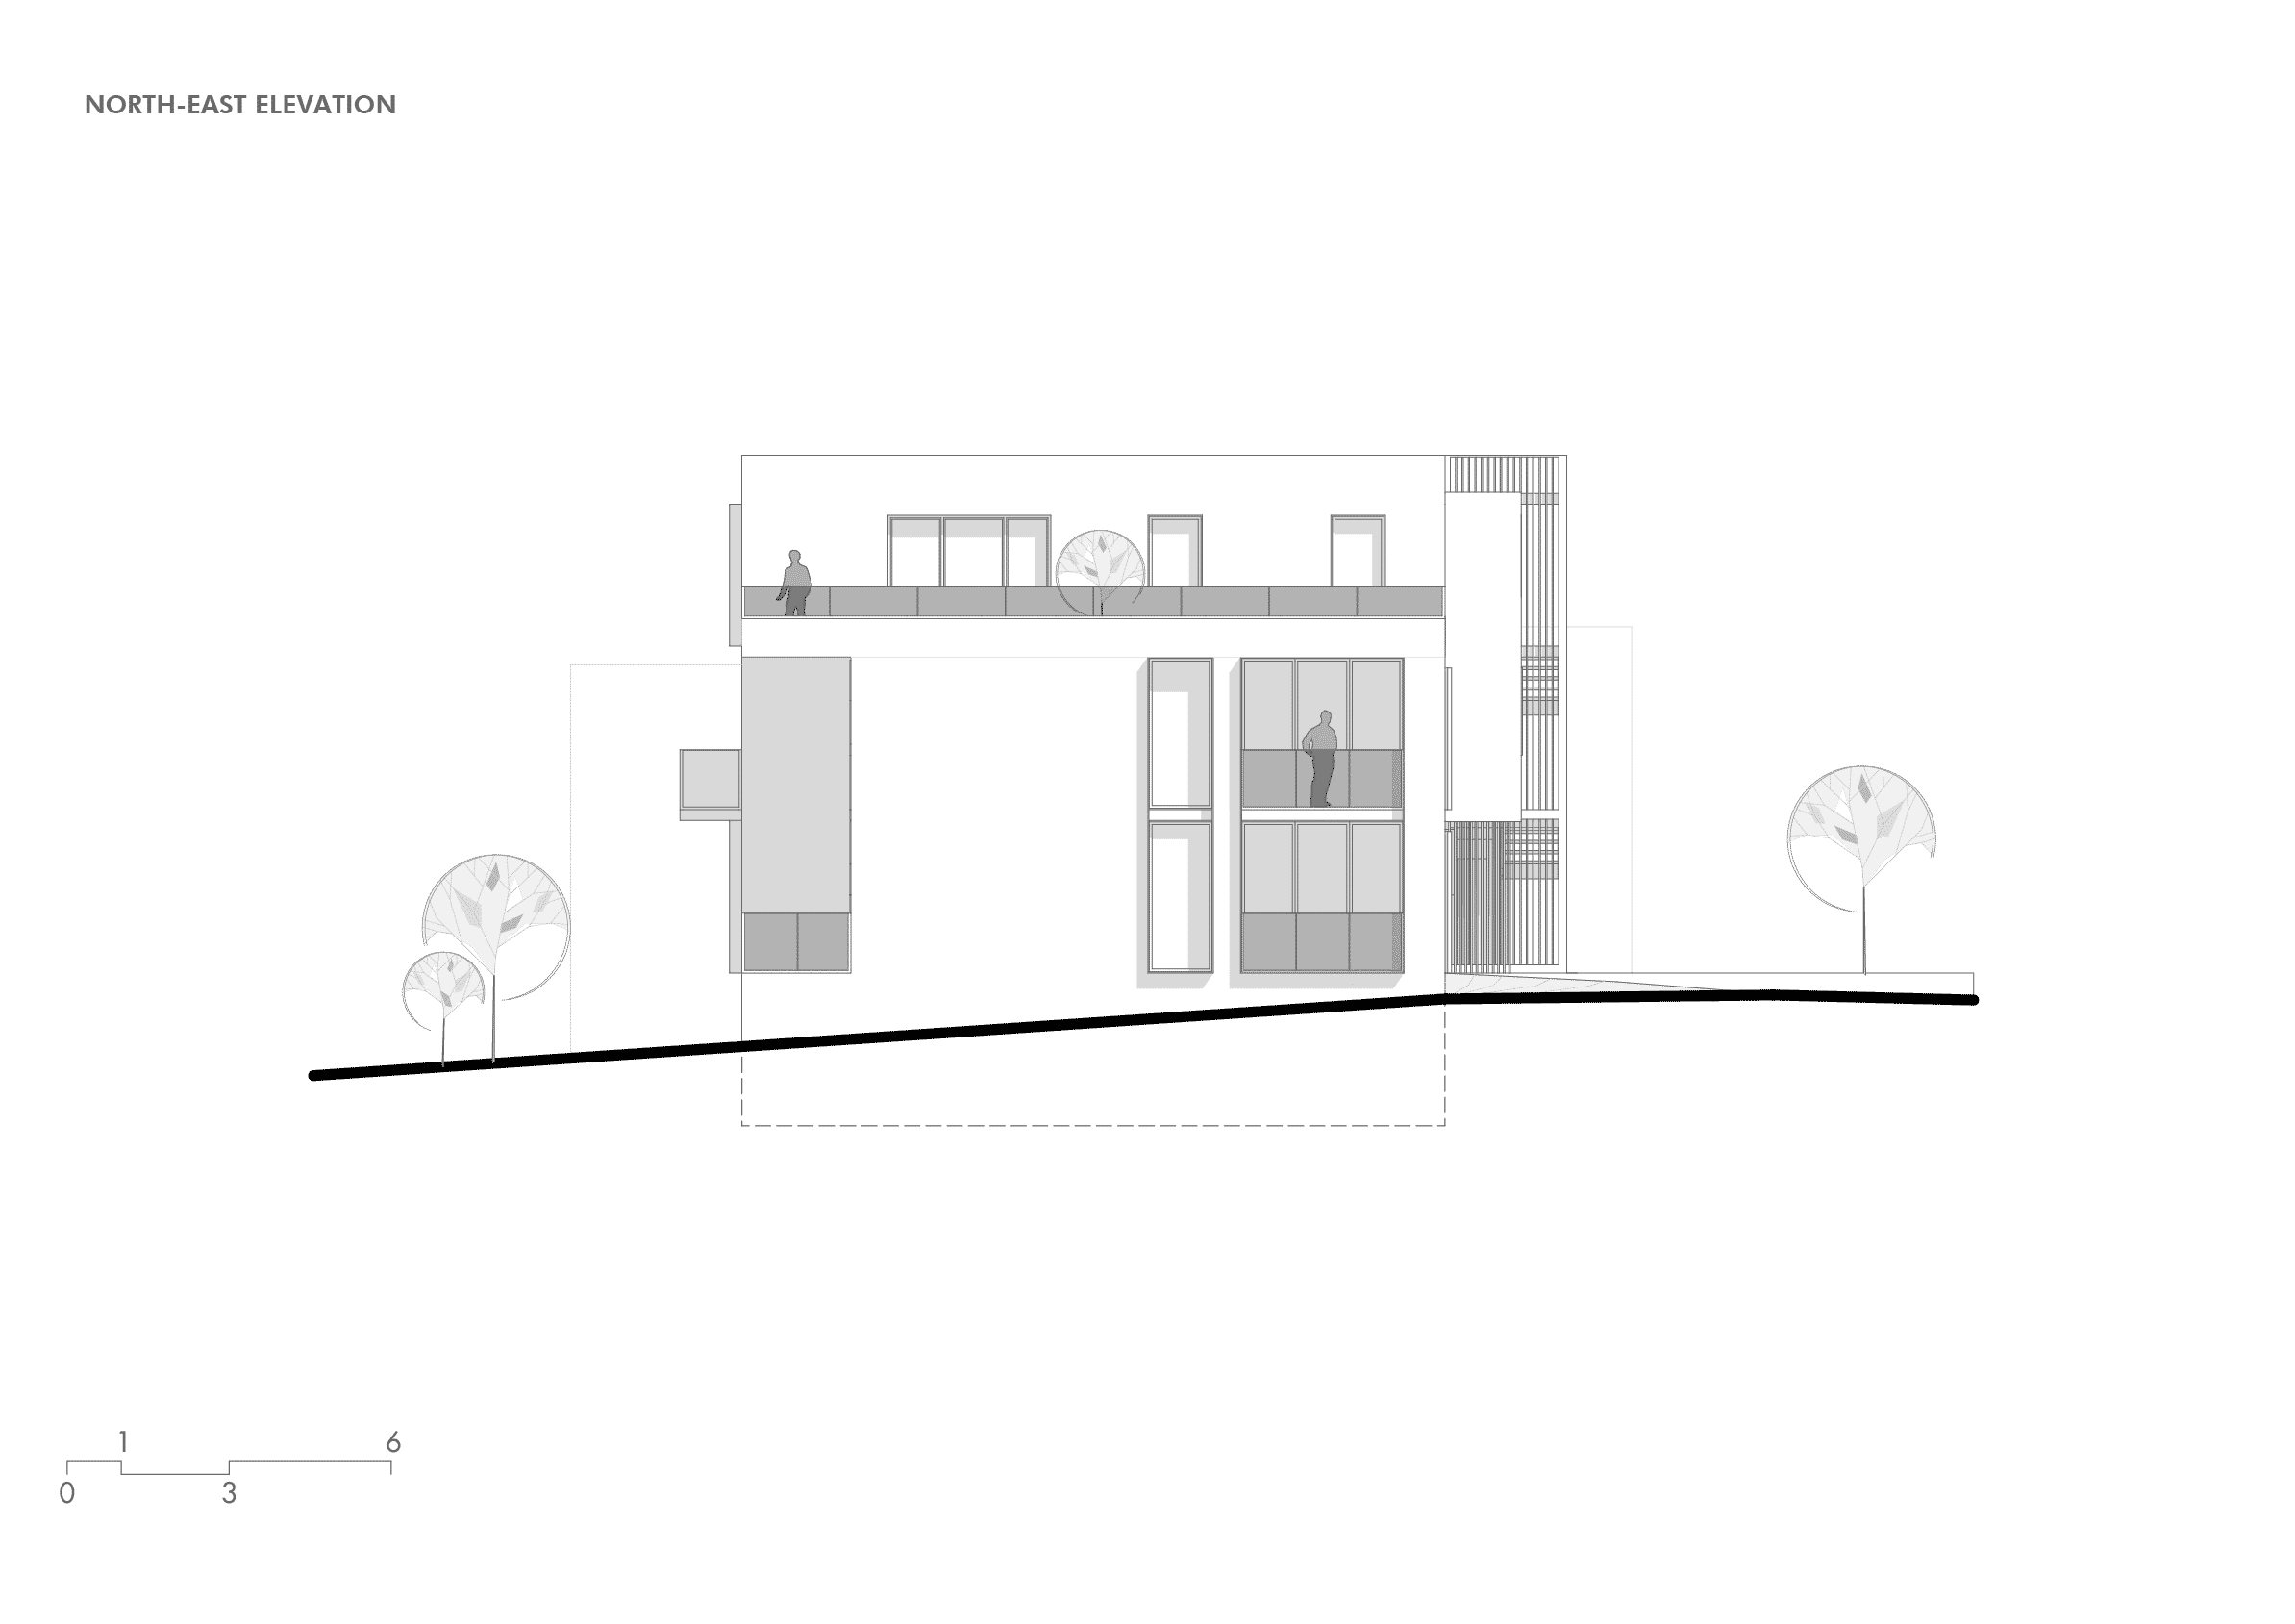 011-swiss-project-north-east-elevation2x